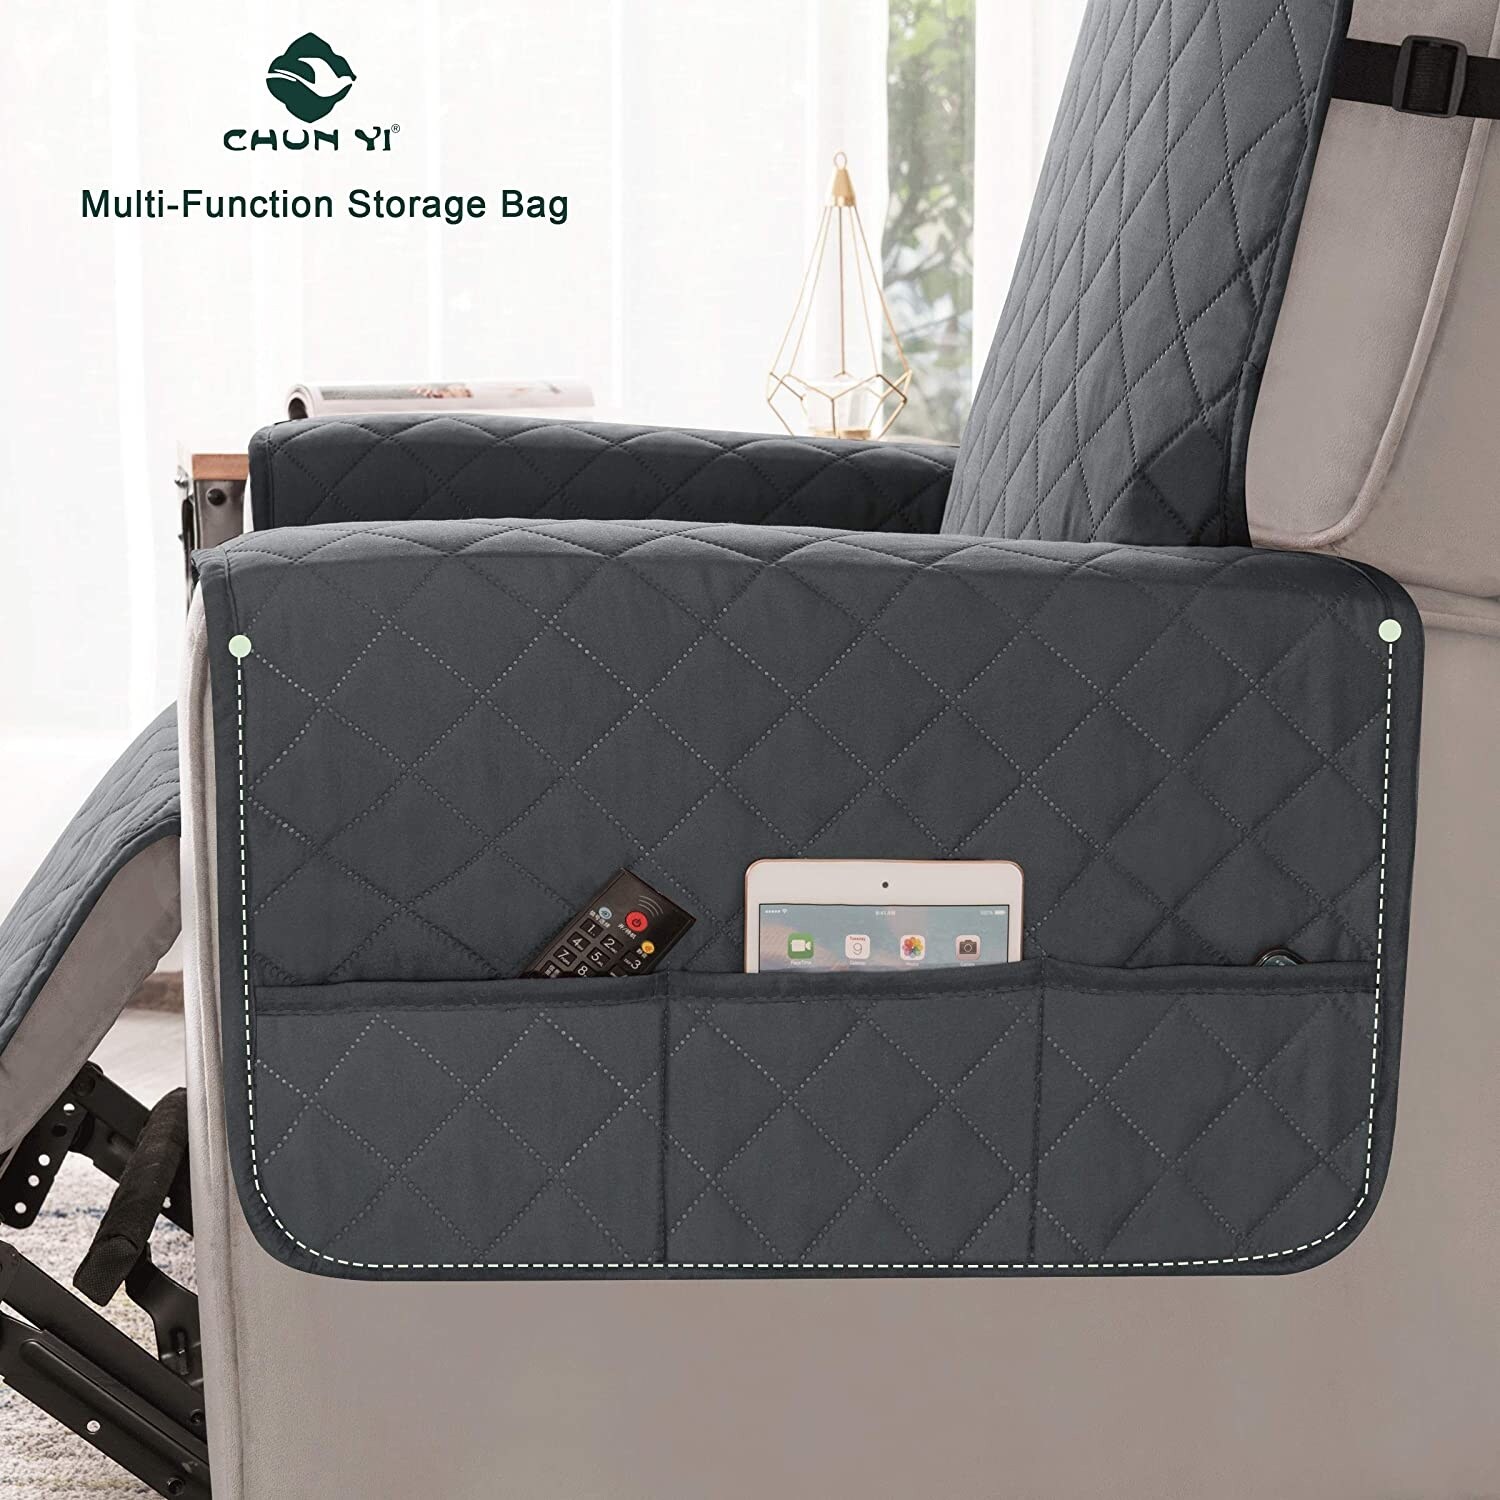 https://ak1.ostkcdn.com/images/products/is/images/direct/f4be3f1ddecb36045546de1a33c81b0ebdad9720/CHUN-YI-Reversible-Large-Recliner-Slipcover-with-Adjustable-Strap.jpg